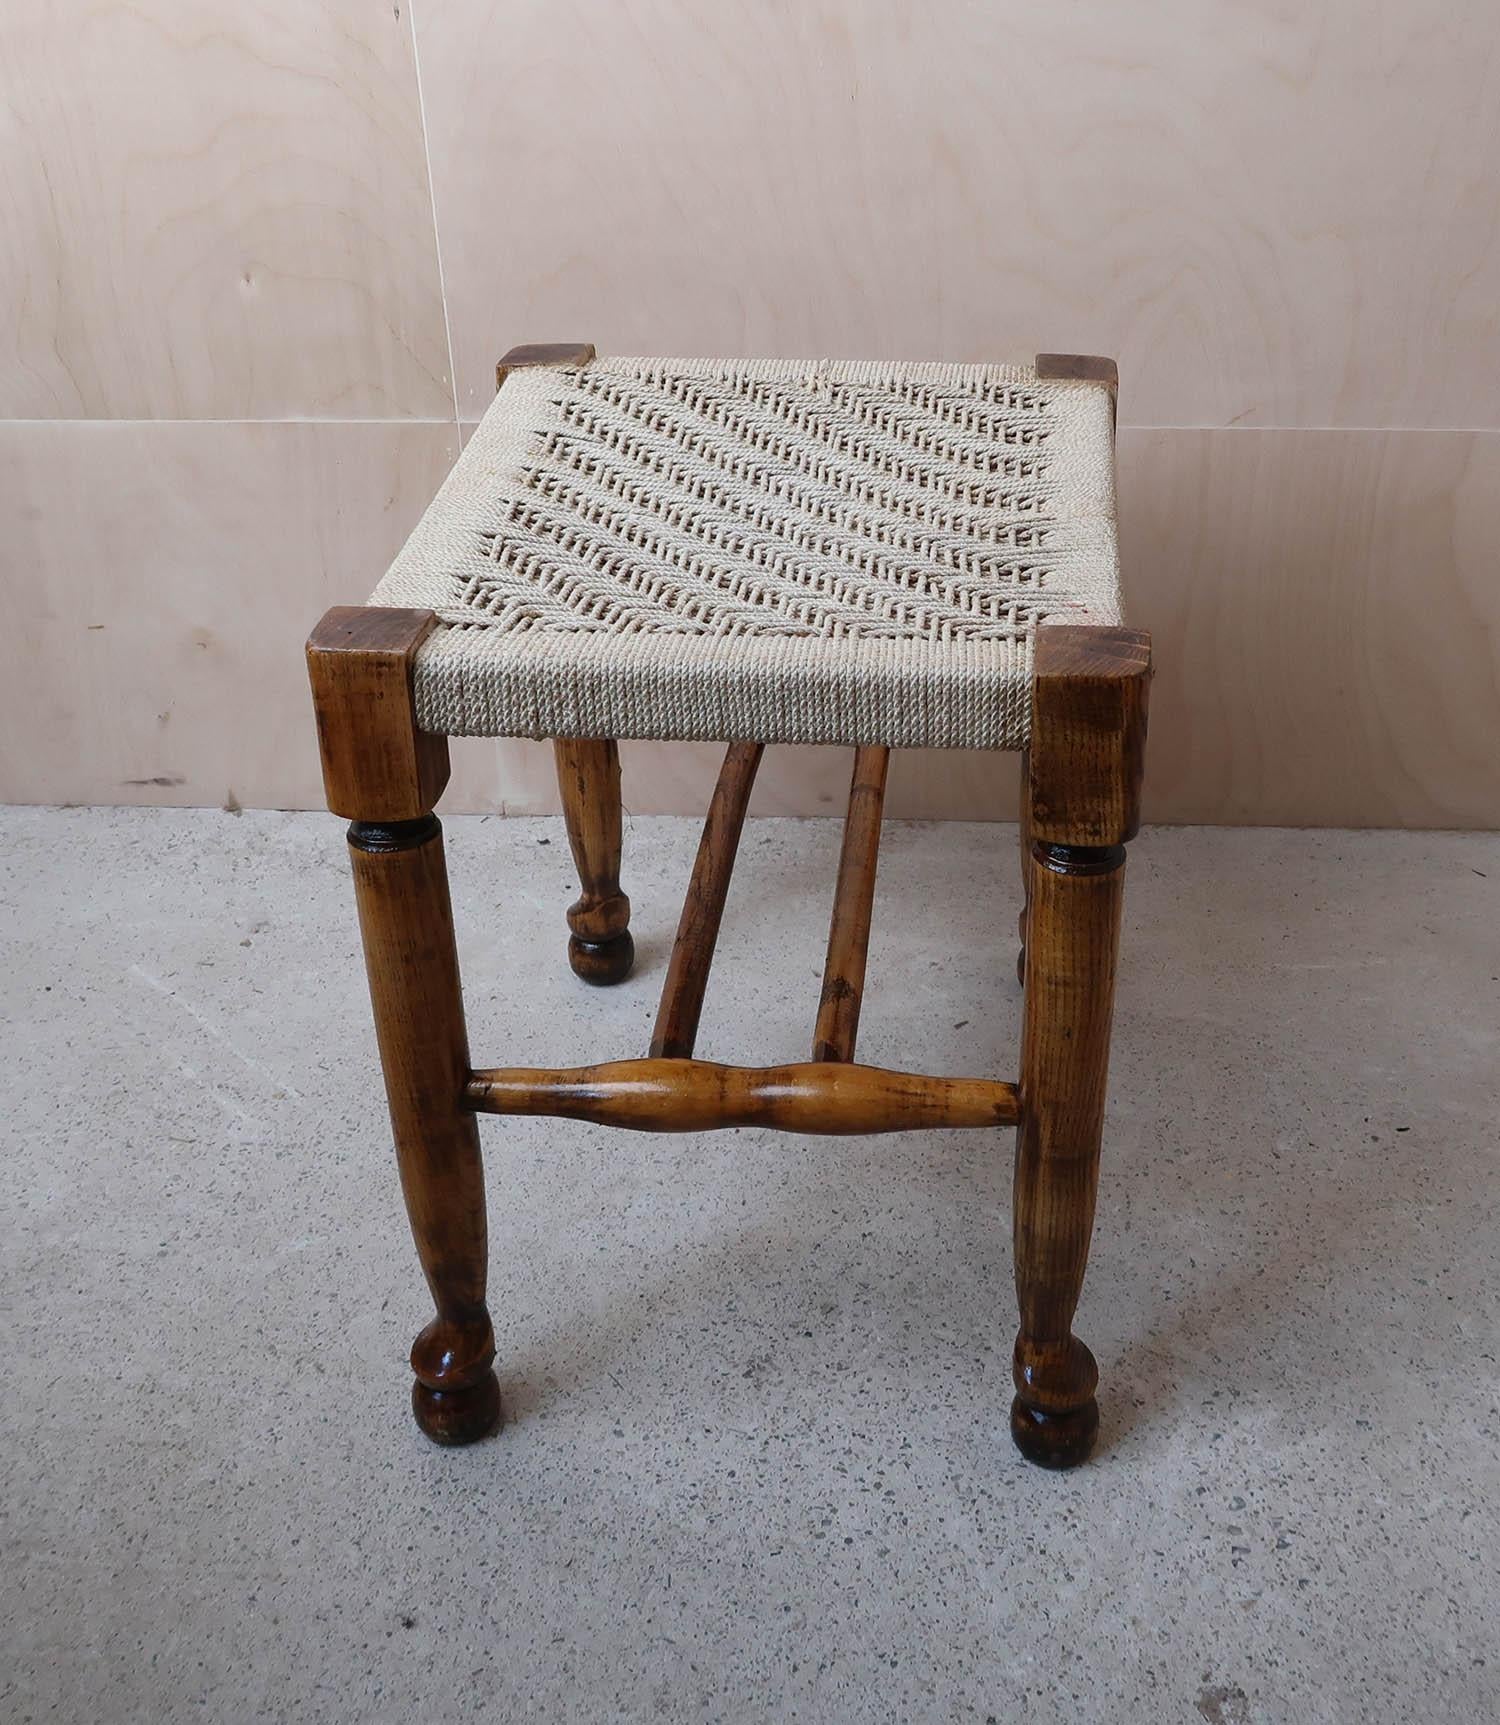 English Vintage Ash and Elm Stool with Rattan or Cord Upholstery